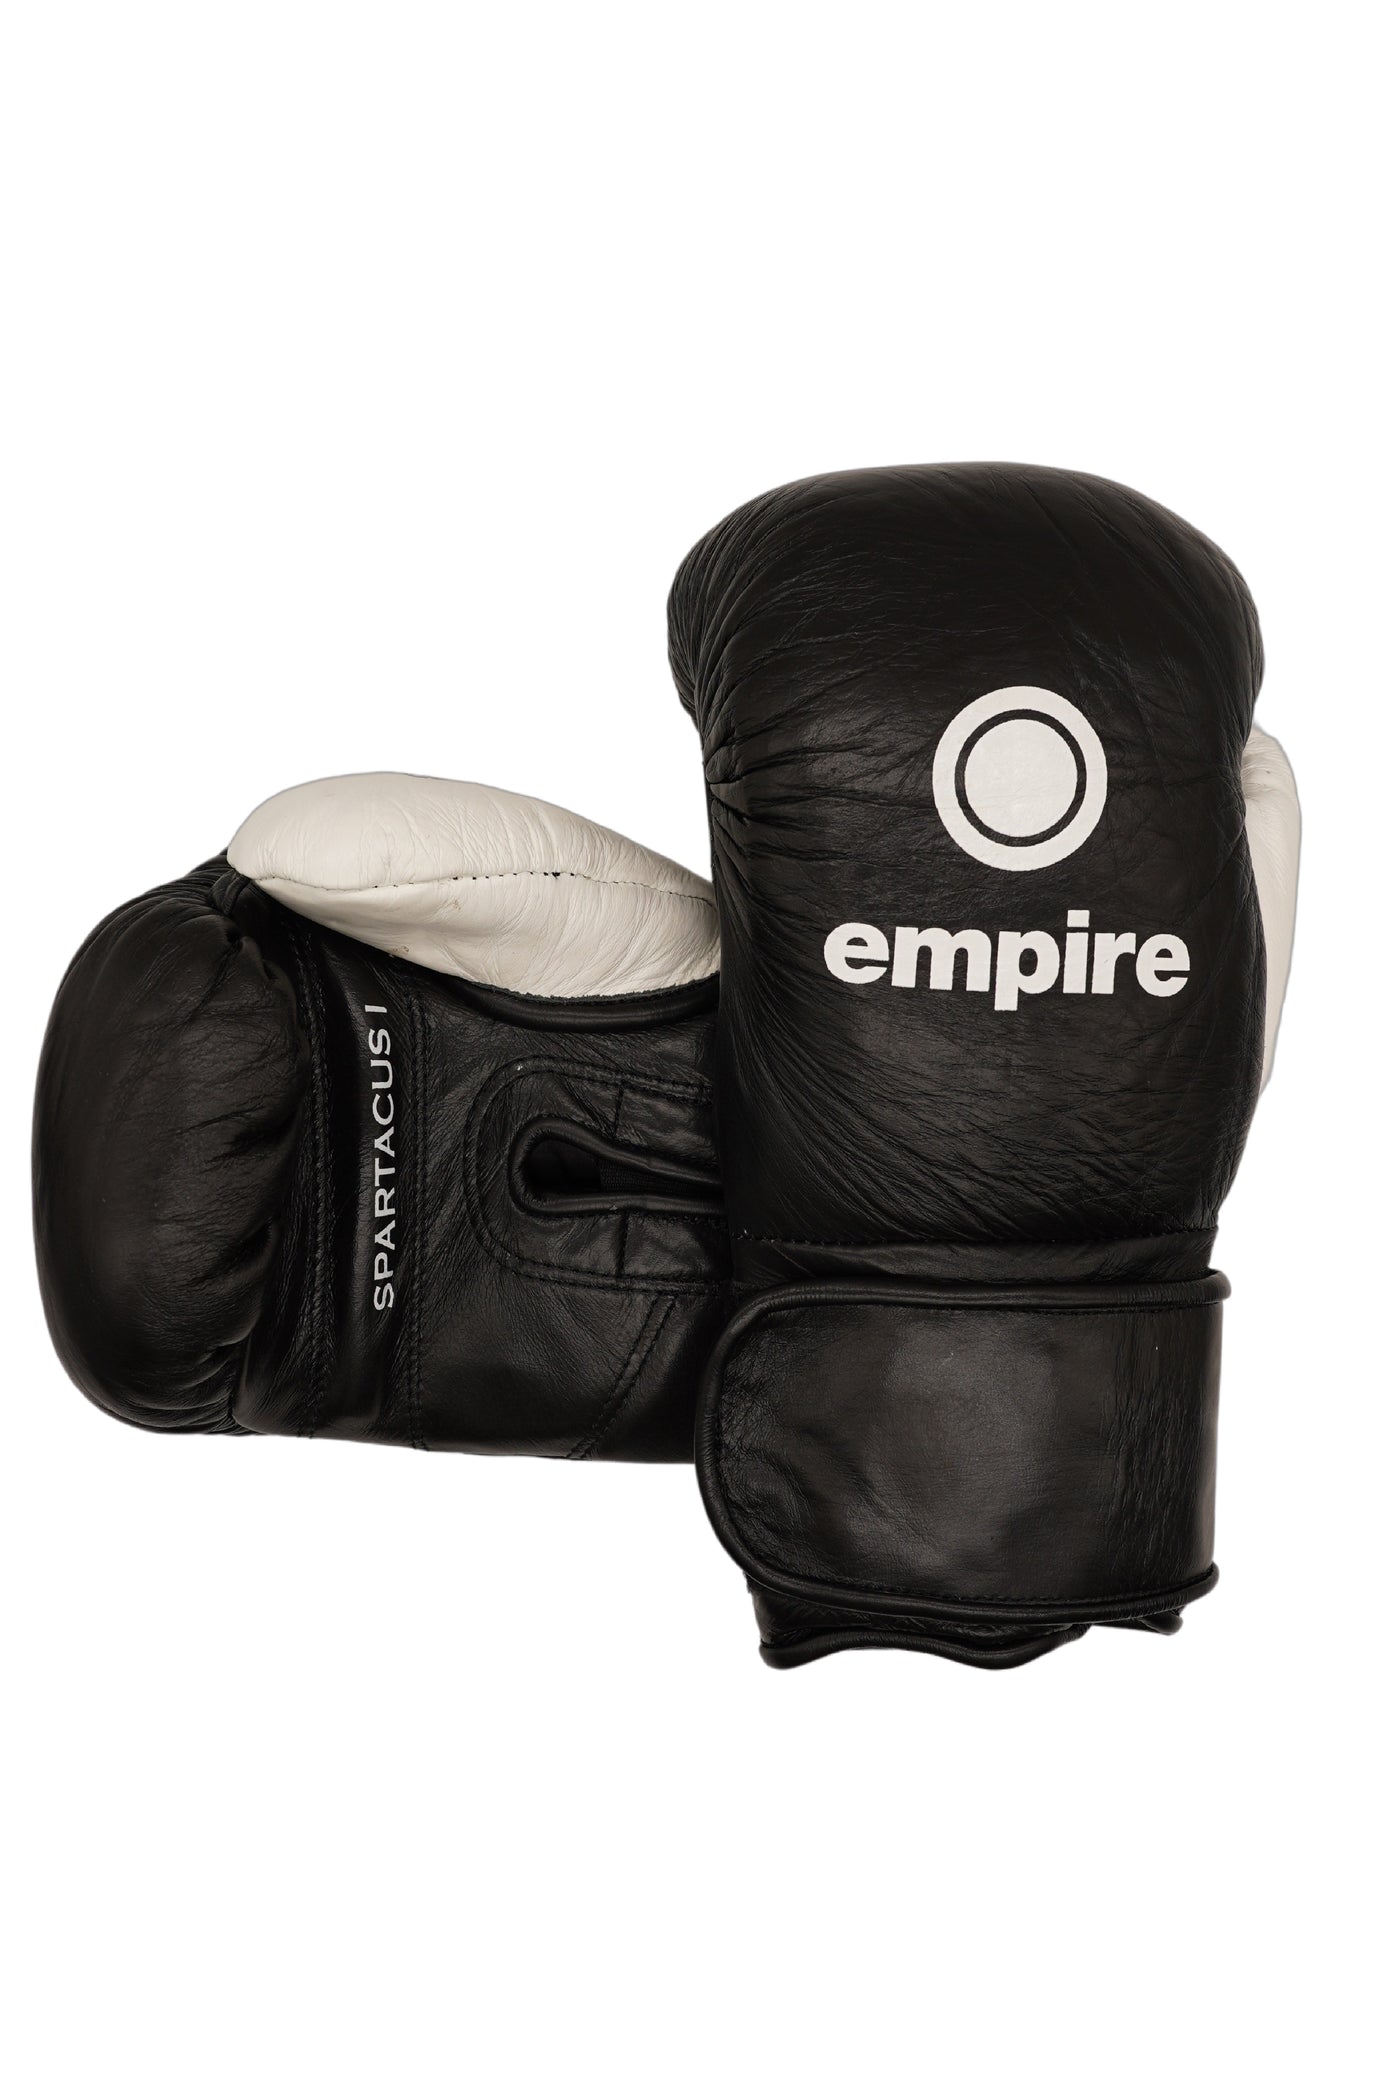 SPARTACUS I White Fusion Hook & Loop Gloves